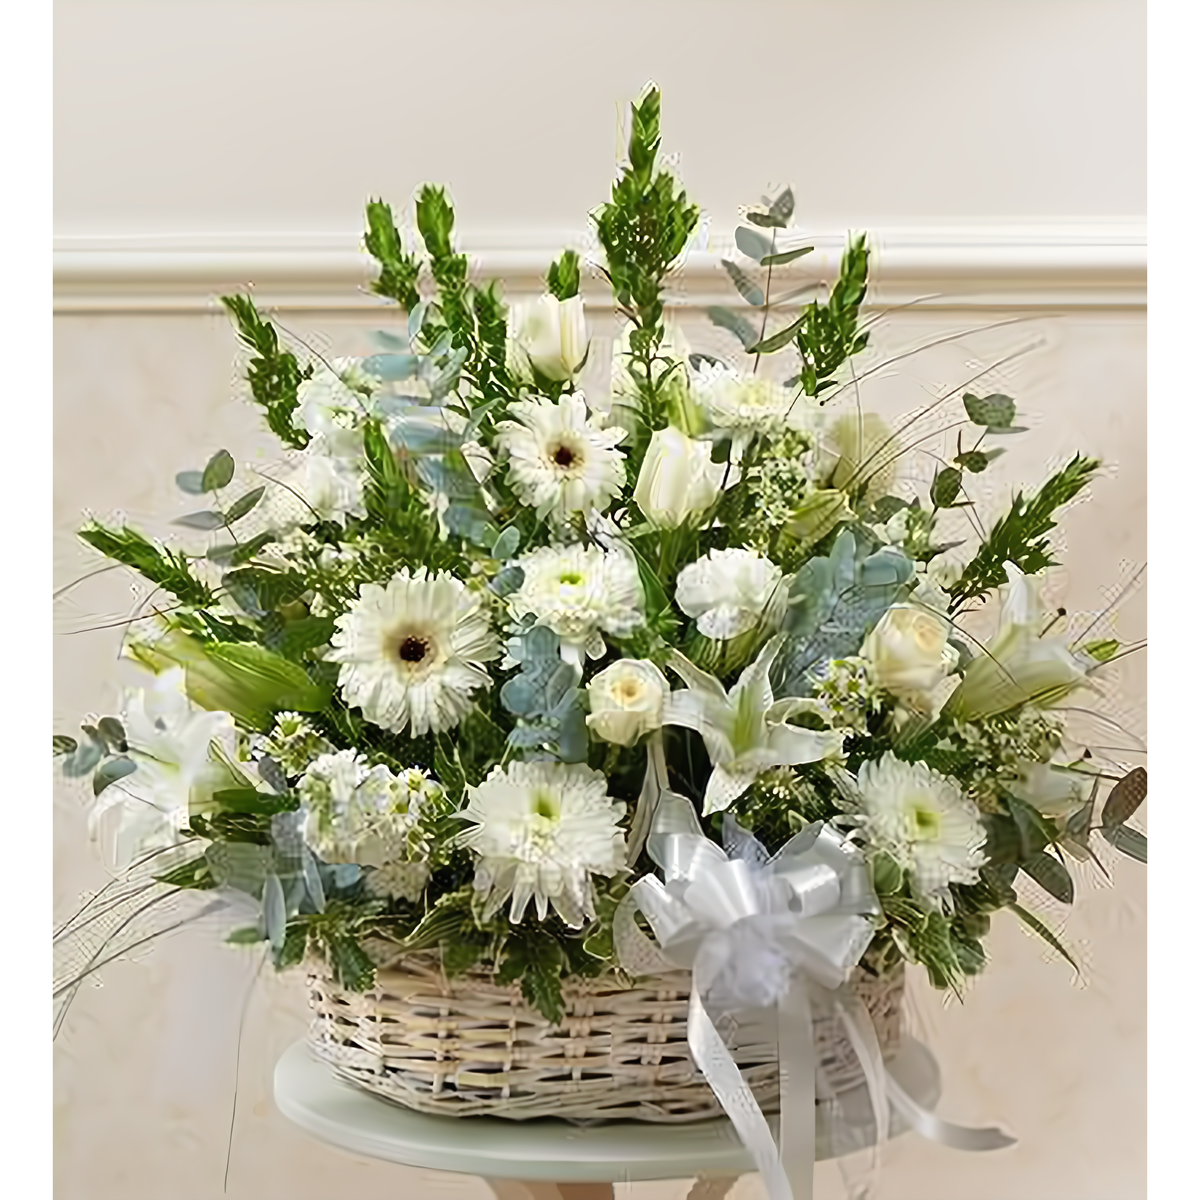 Manhattan Flower Delivery - White Sympathy Arrangement in Basket - Funeral &gt; For the Service